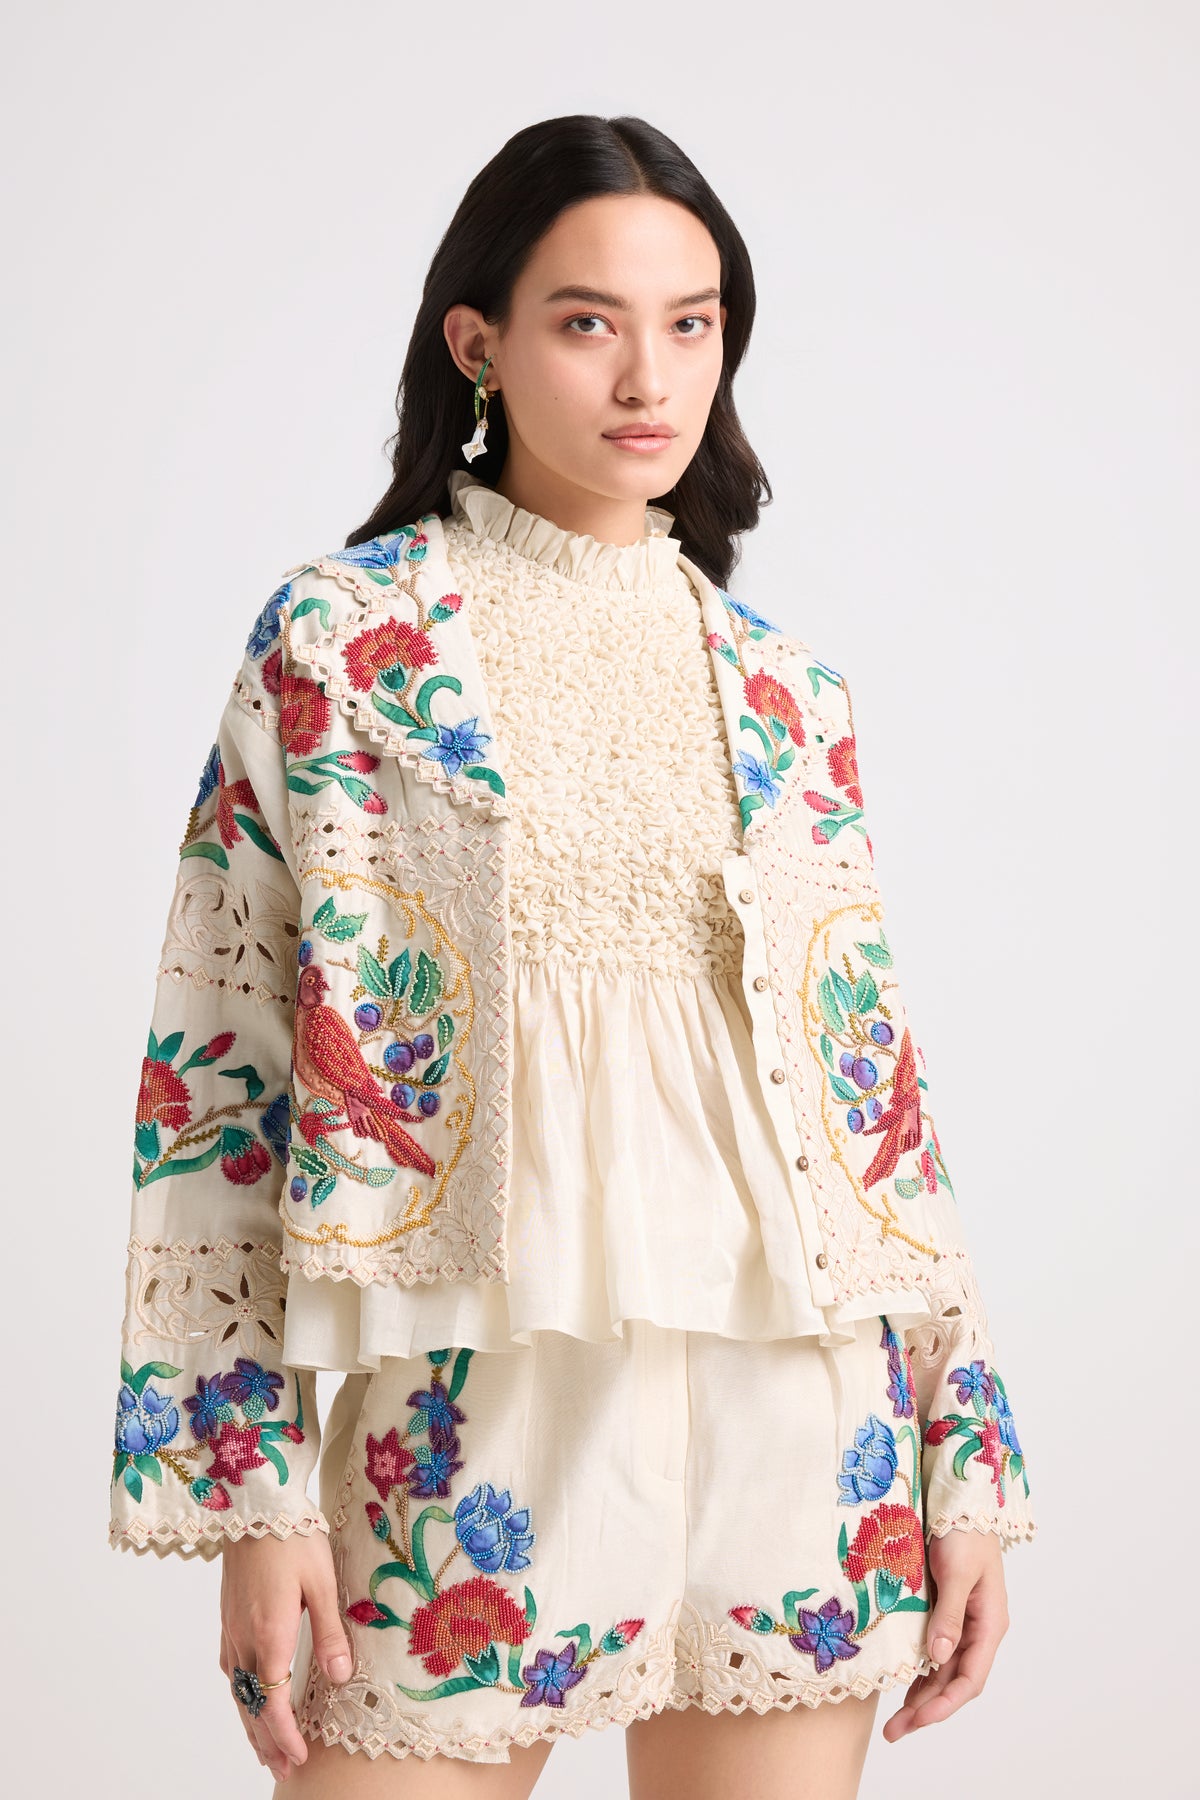 Ivory Applique And Beadwork Short Jacket